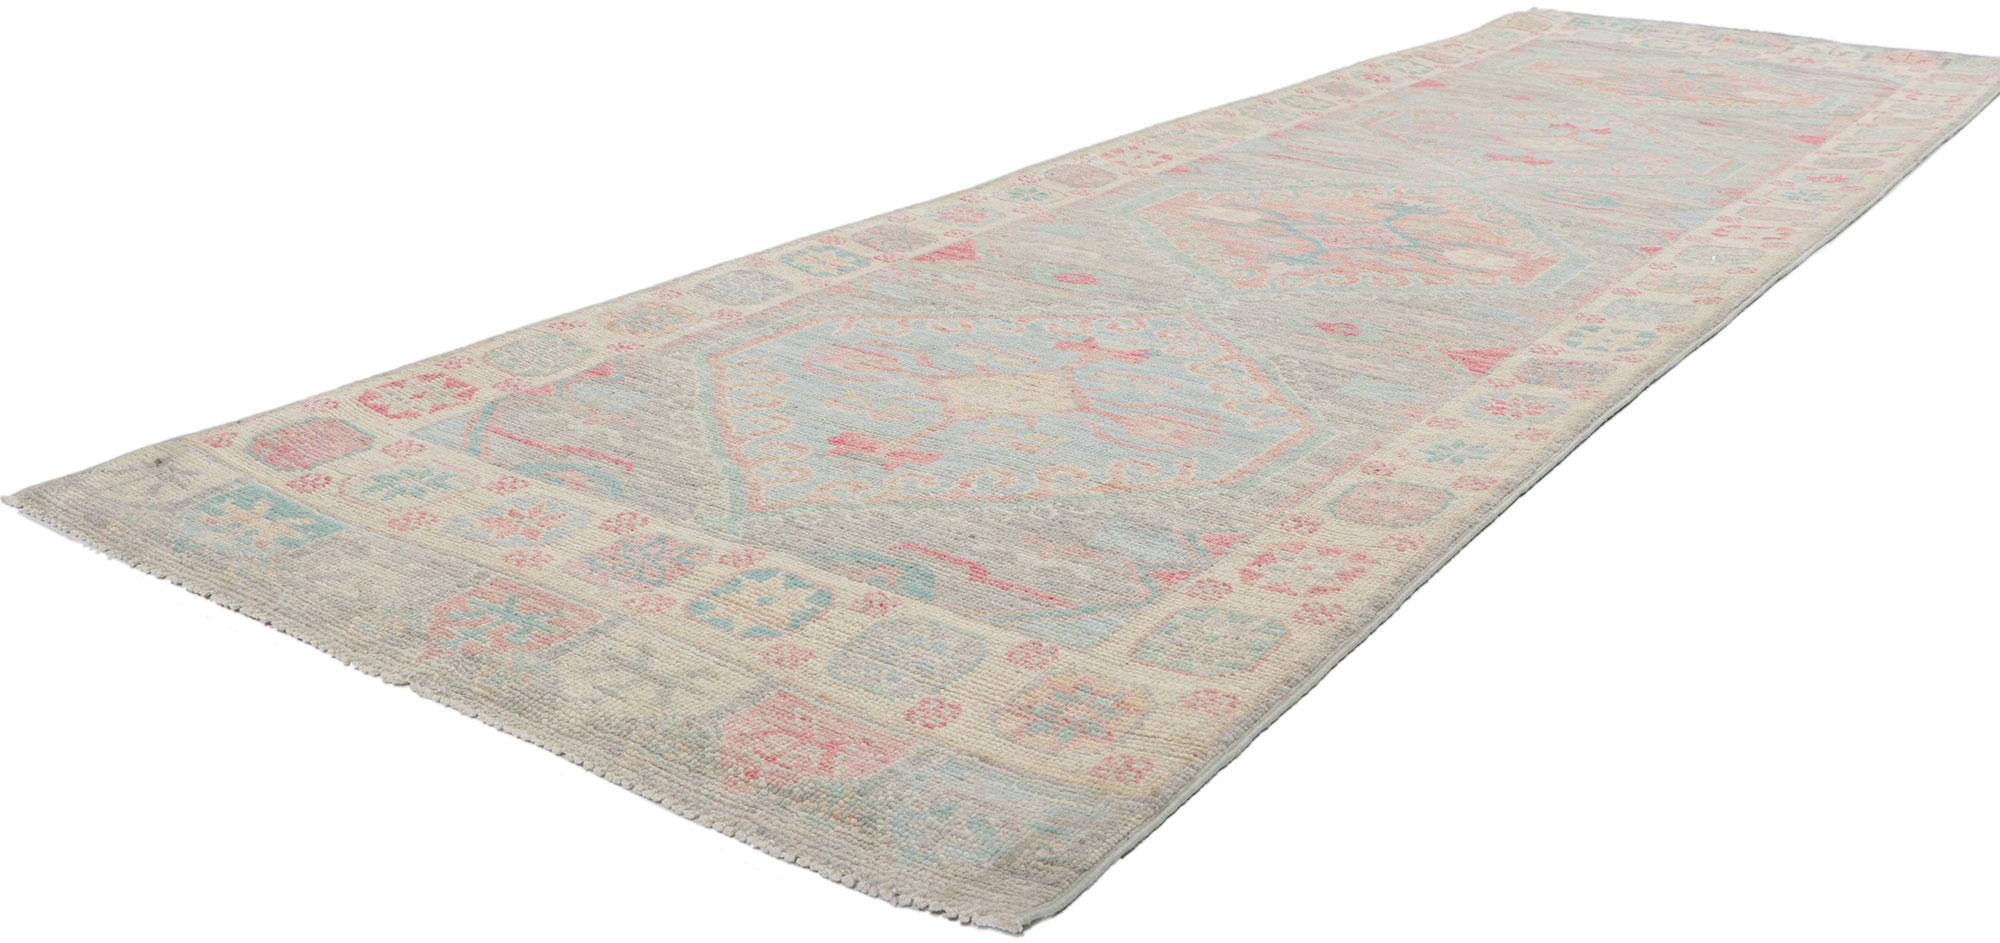 80866 New Contemporary Oushak Runner, 03'00 x 10'02. This hand-knotted wool contemporary Oushak hallway rug features an all-over botanical pattern composed of amorphous organic motifs spread across an abrashed baby blue and light gray striated